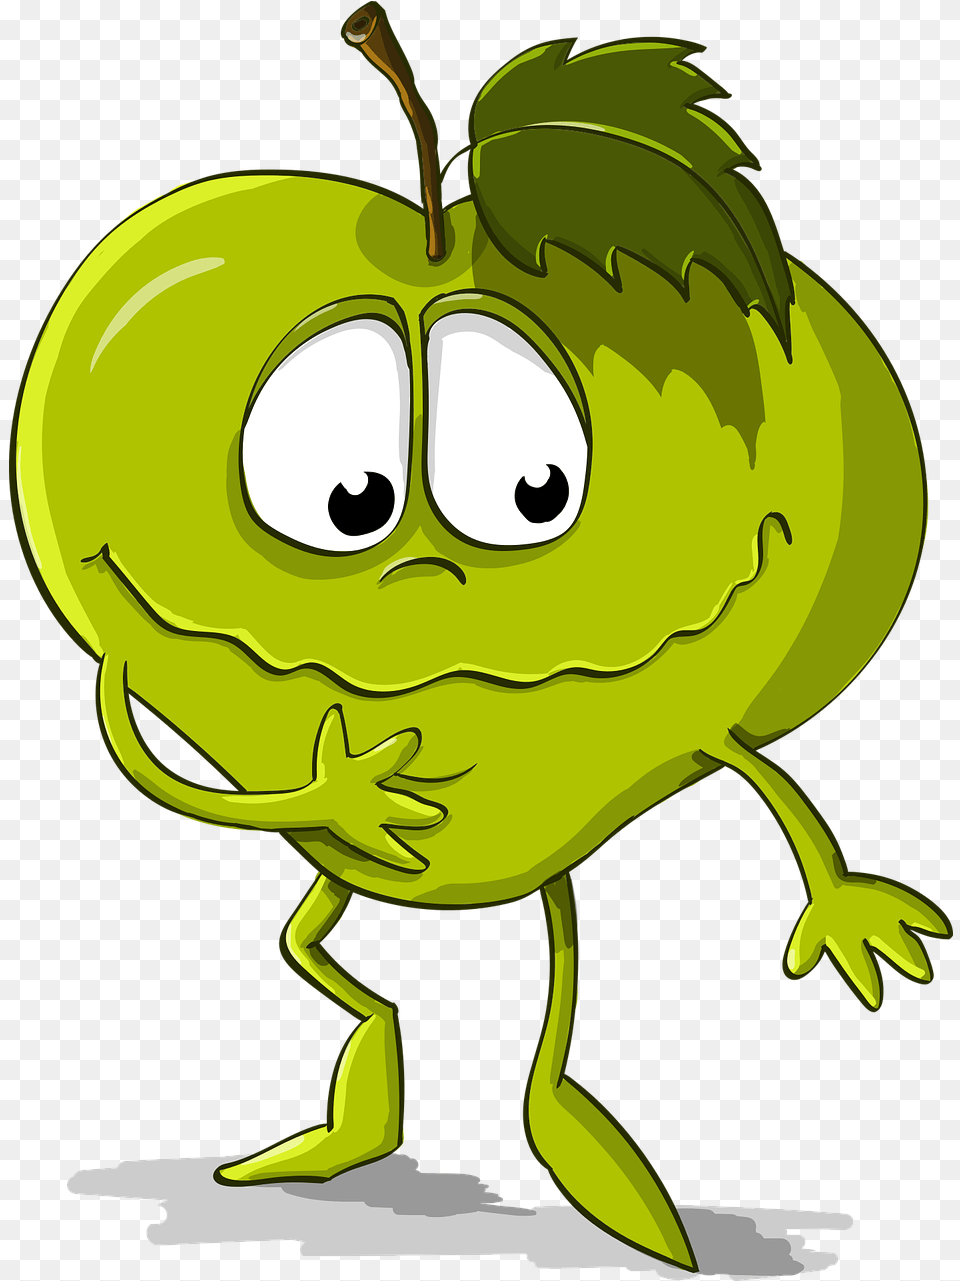 Apple Funny Smile Free Vector Graphic On Pixabay Leek Joke, Green, Baby, Person, Face Png Image